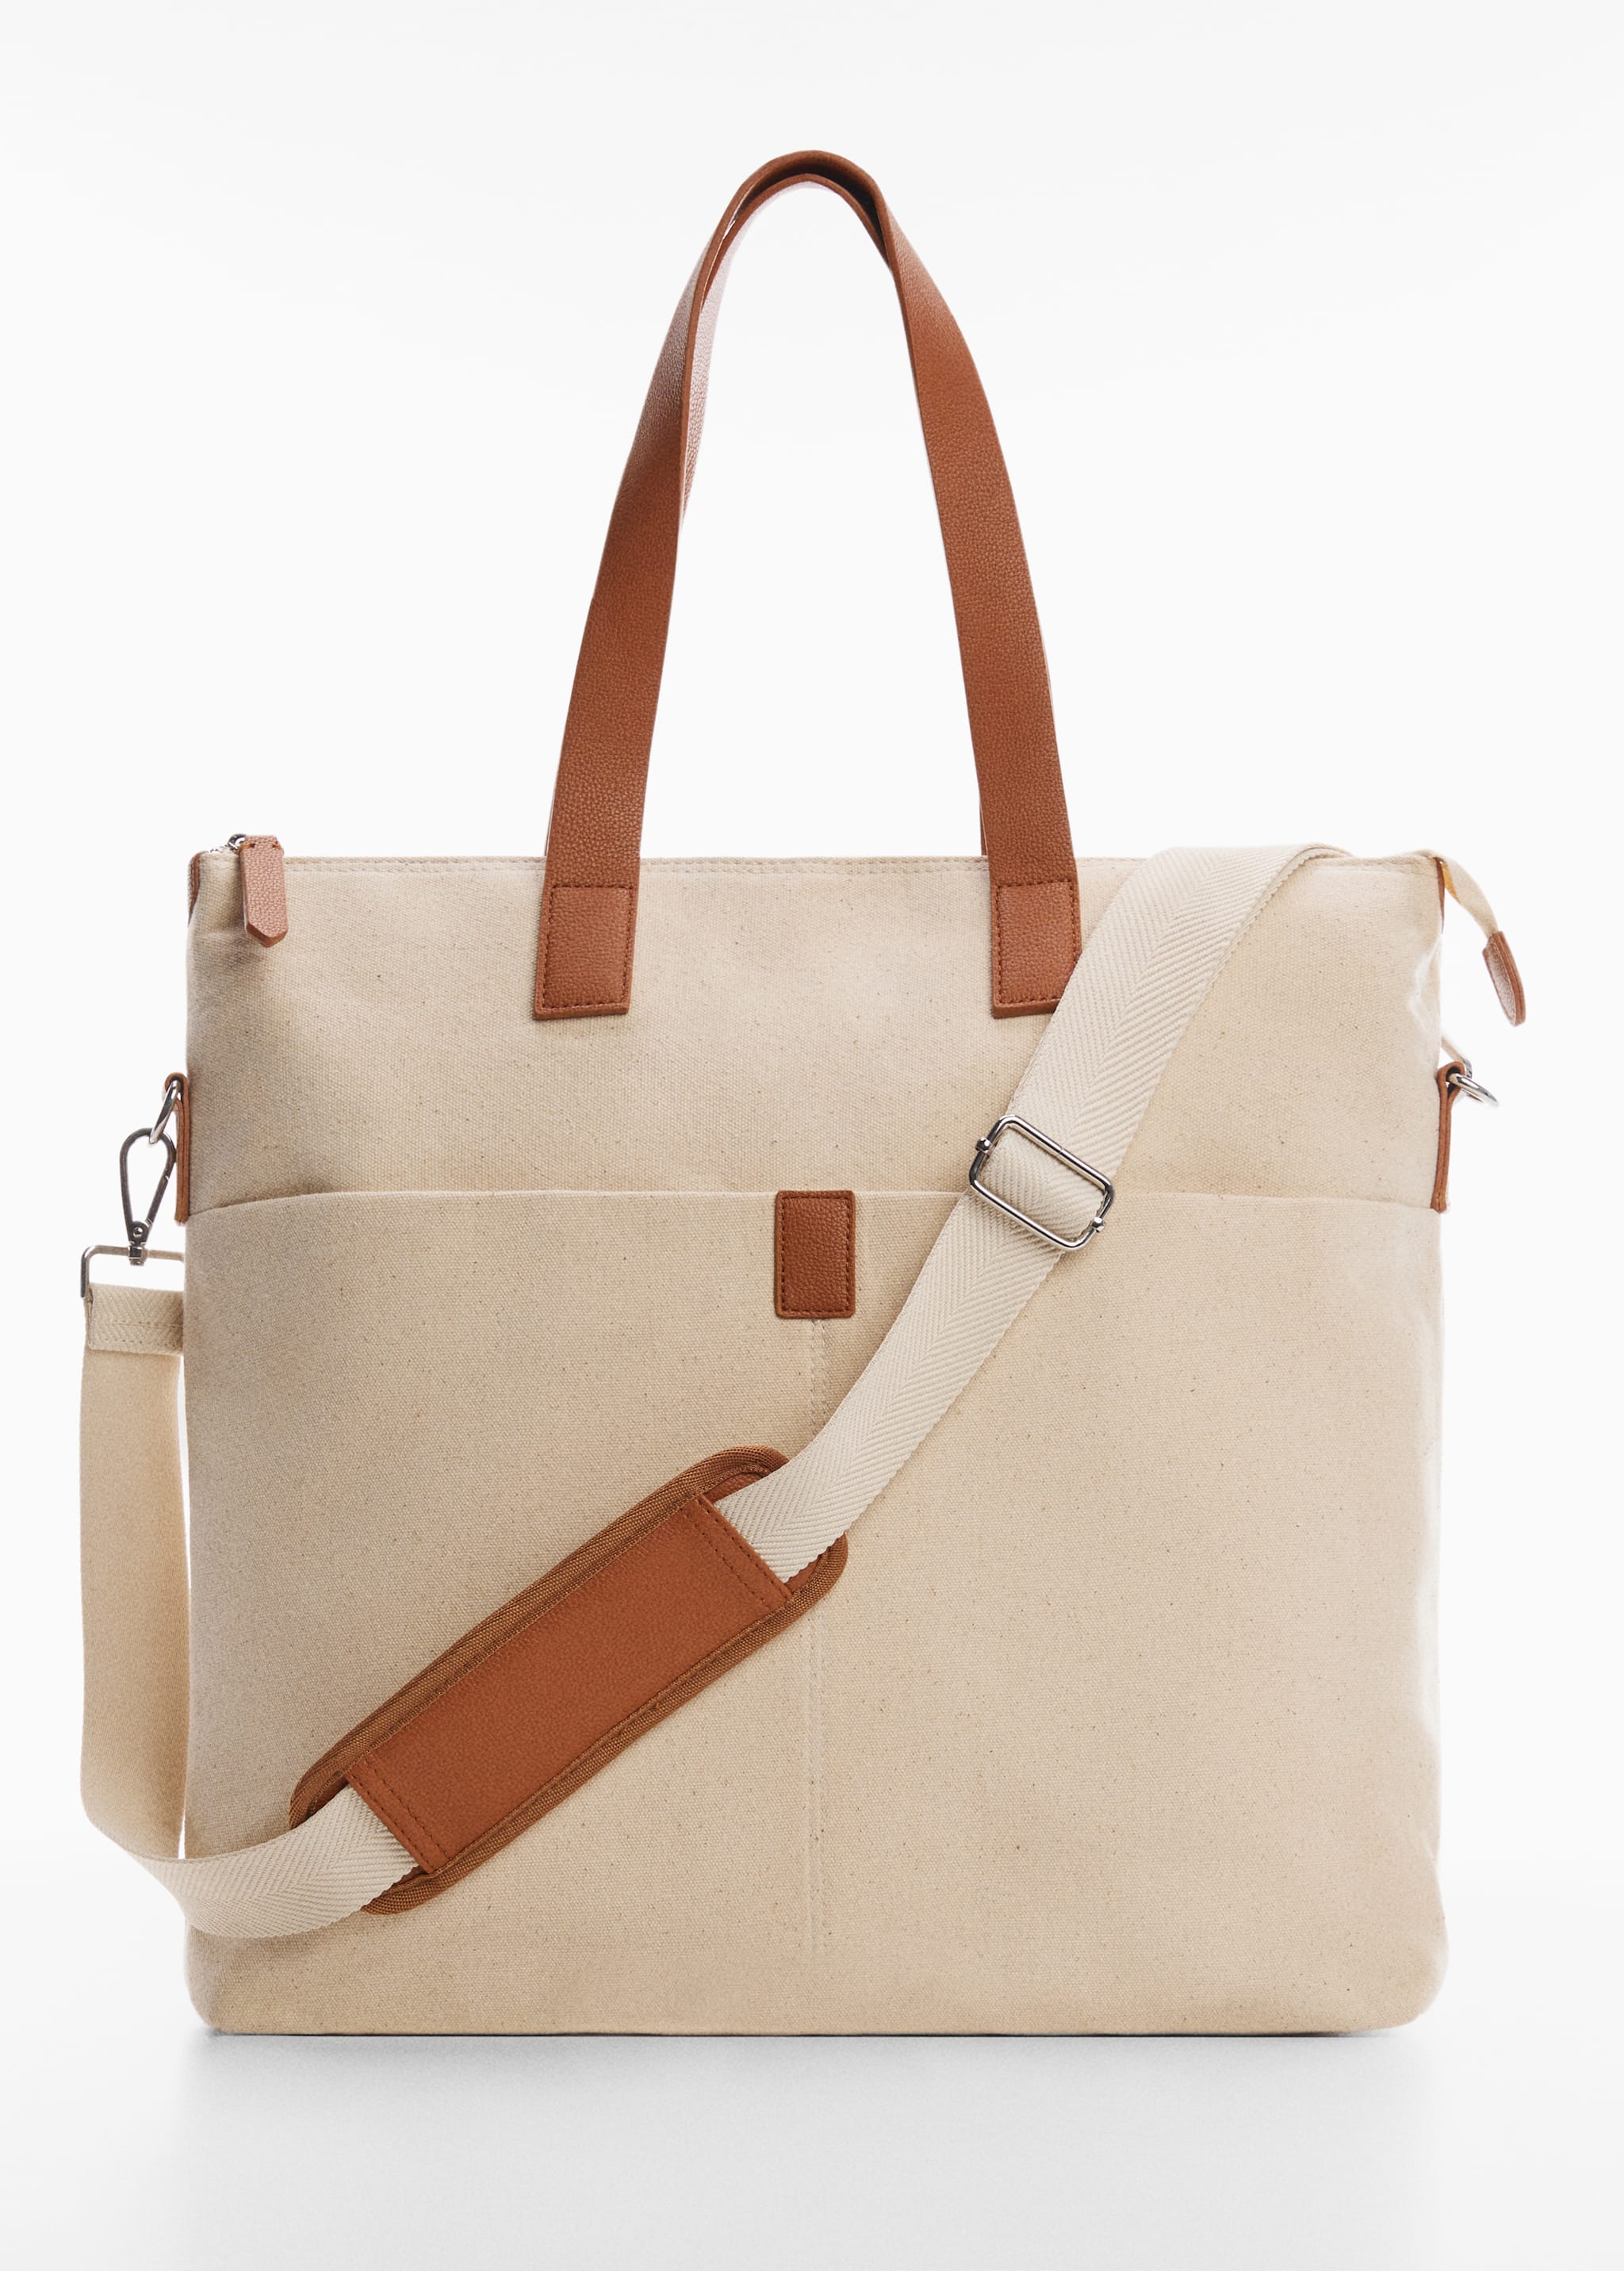 Cotton canvas tote bag - Article without model